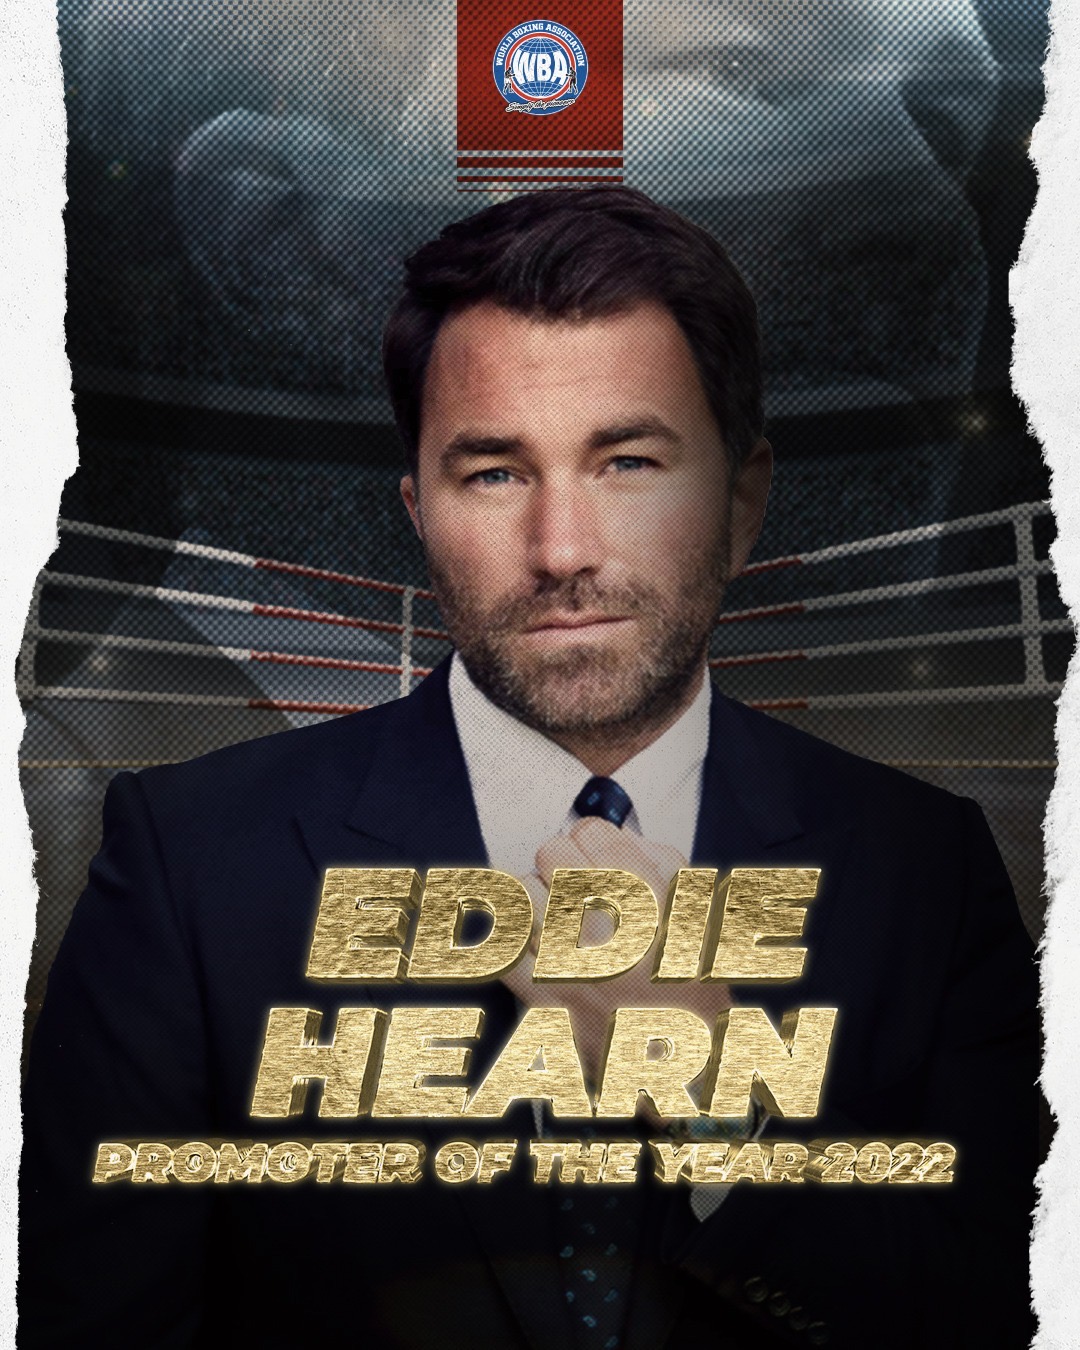 Eddie Hearn Promoter of the Year